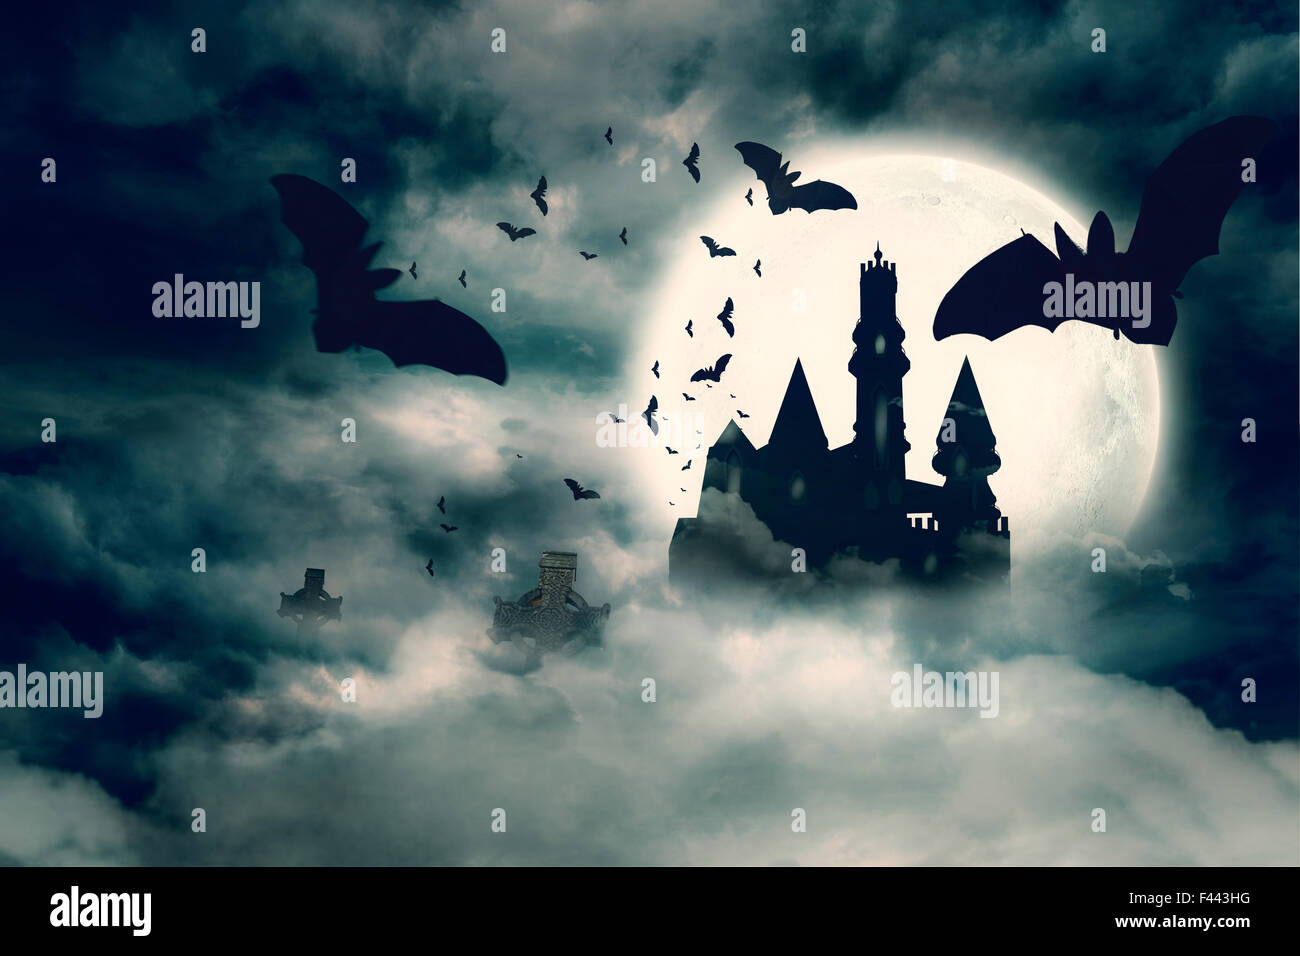 Bats flying to draculas castle Stock Photo